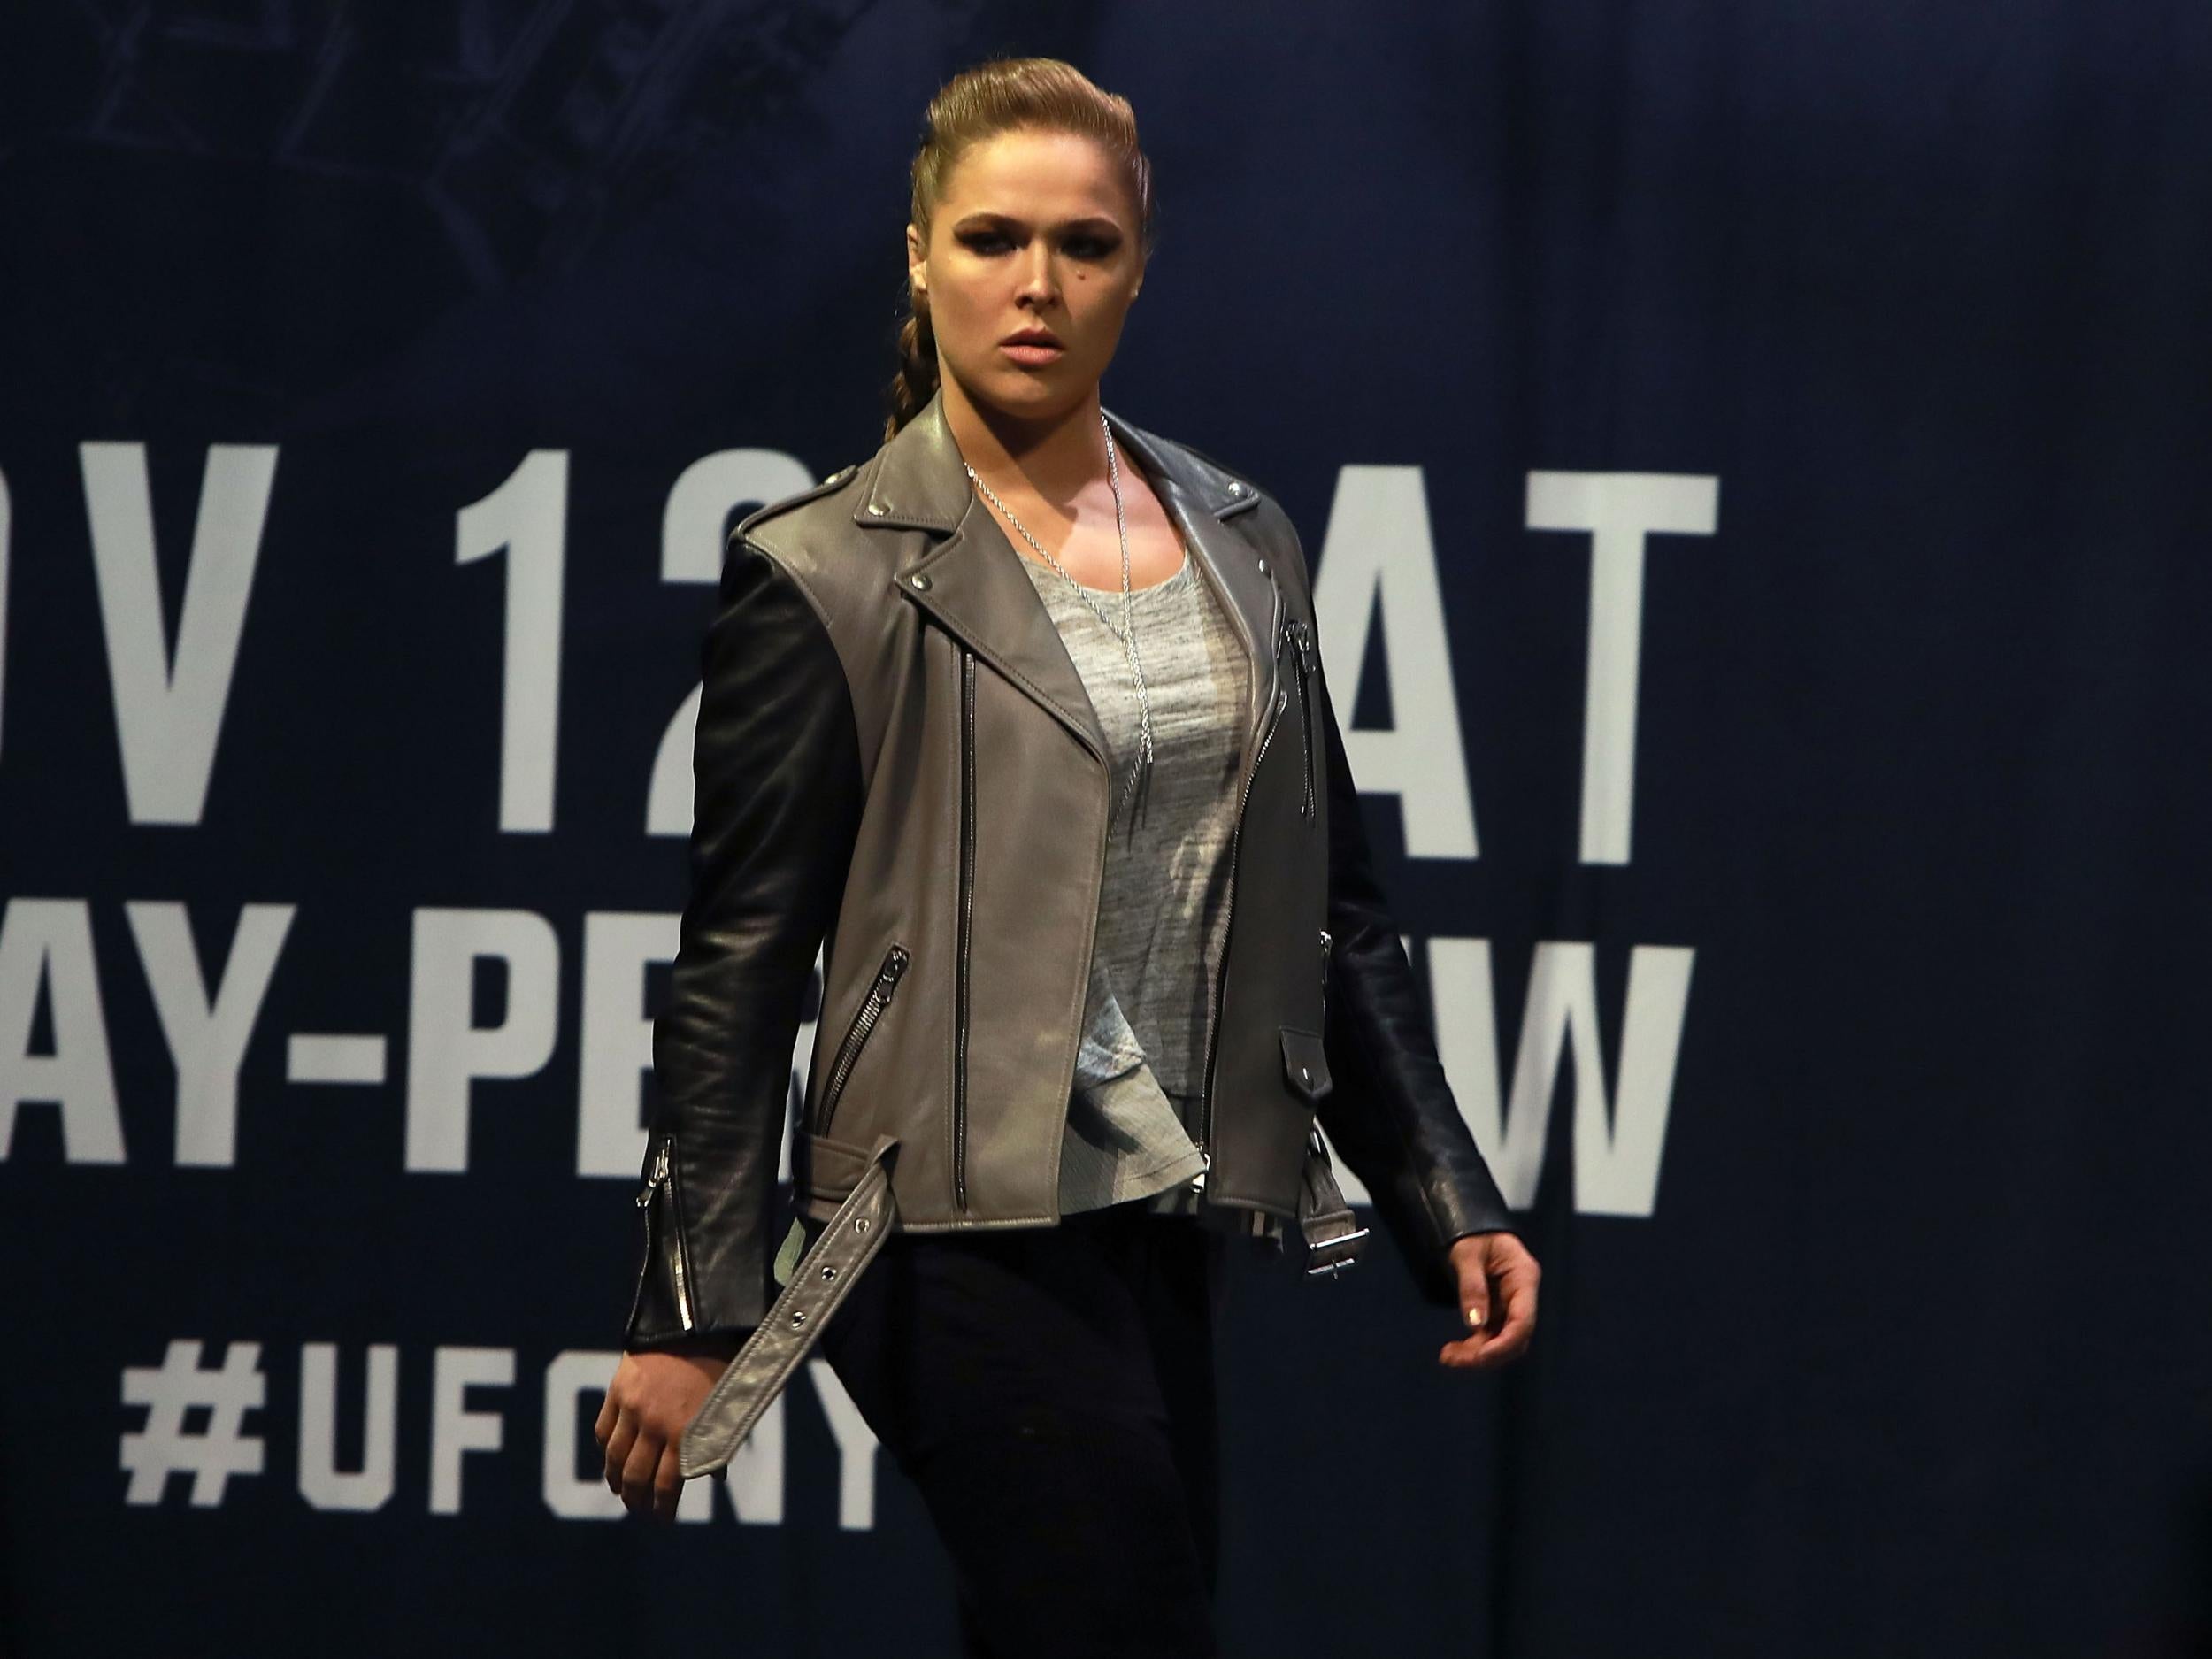 Rousey refused to participate in any media activities in the week leading up to the fight